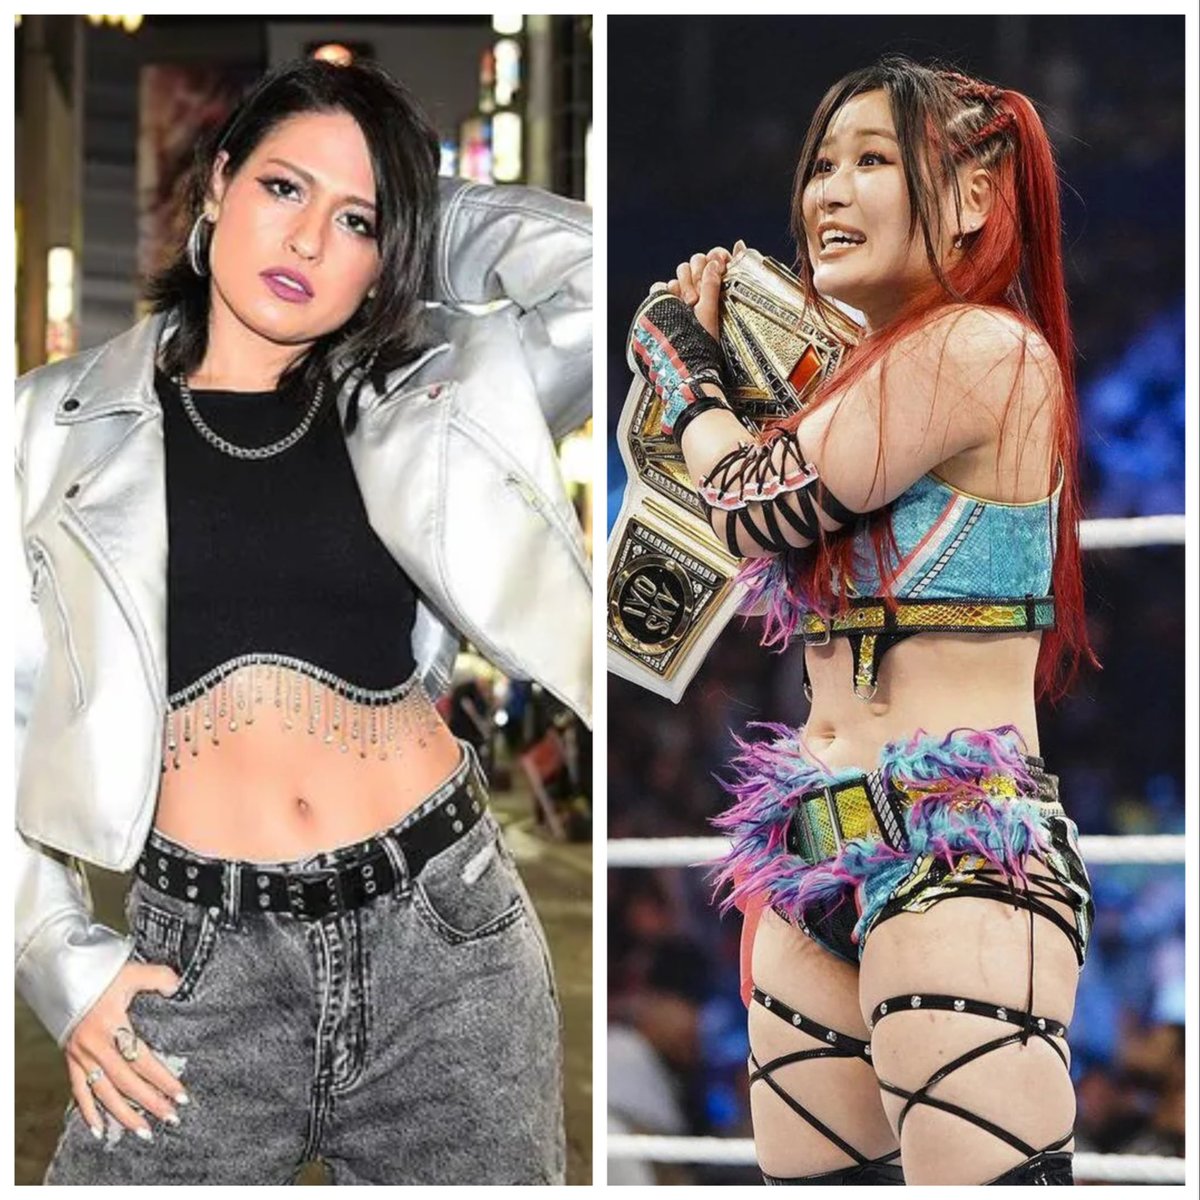 Today in Tokyo Sports Giulia talked about seeing Iyo Sky make her entrance at Wrestlemania 40 🥹 “Tears filled my eyes as I saw Iyo walk down the aisle & make her entrance amidst the cheers of 70,000 people. I felt like there was a lot of hard work k & effort there, not only…